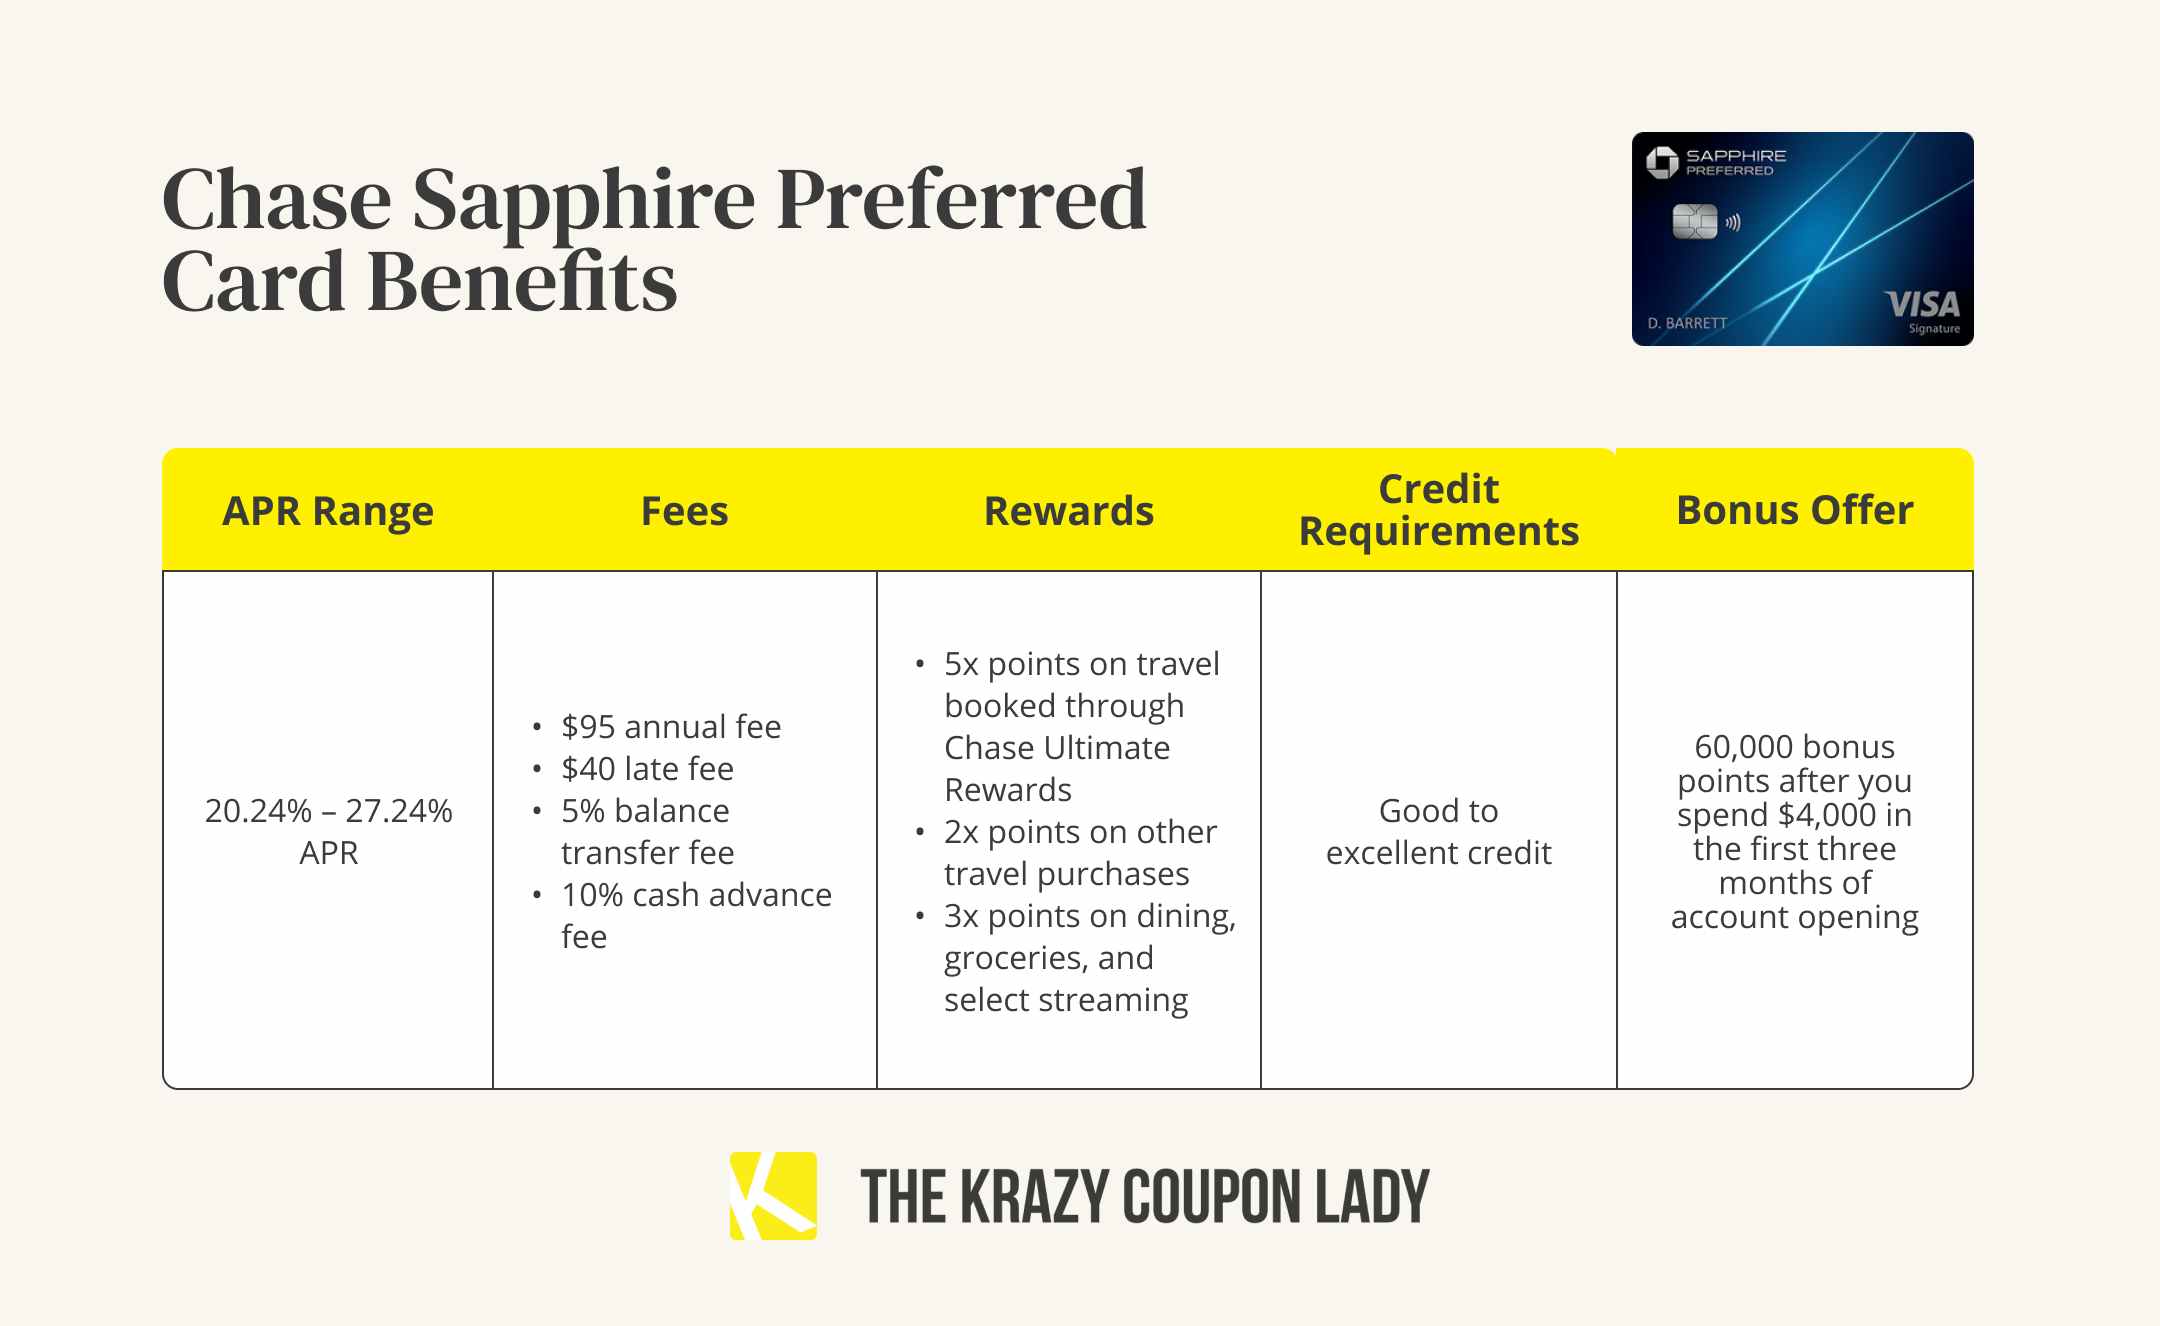 A graphic showing the Chase Sapphire preferred credit card benefits